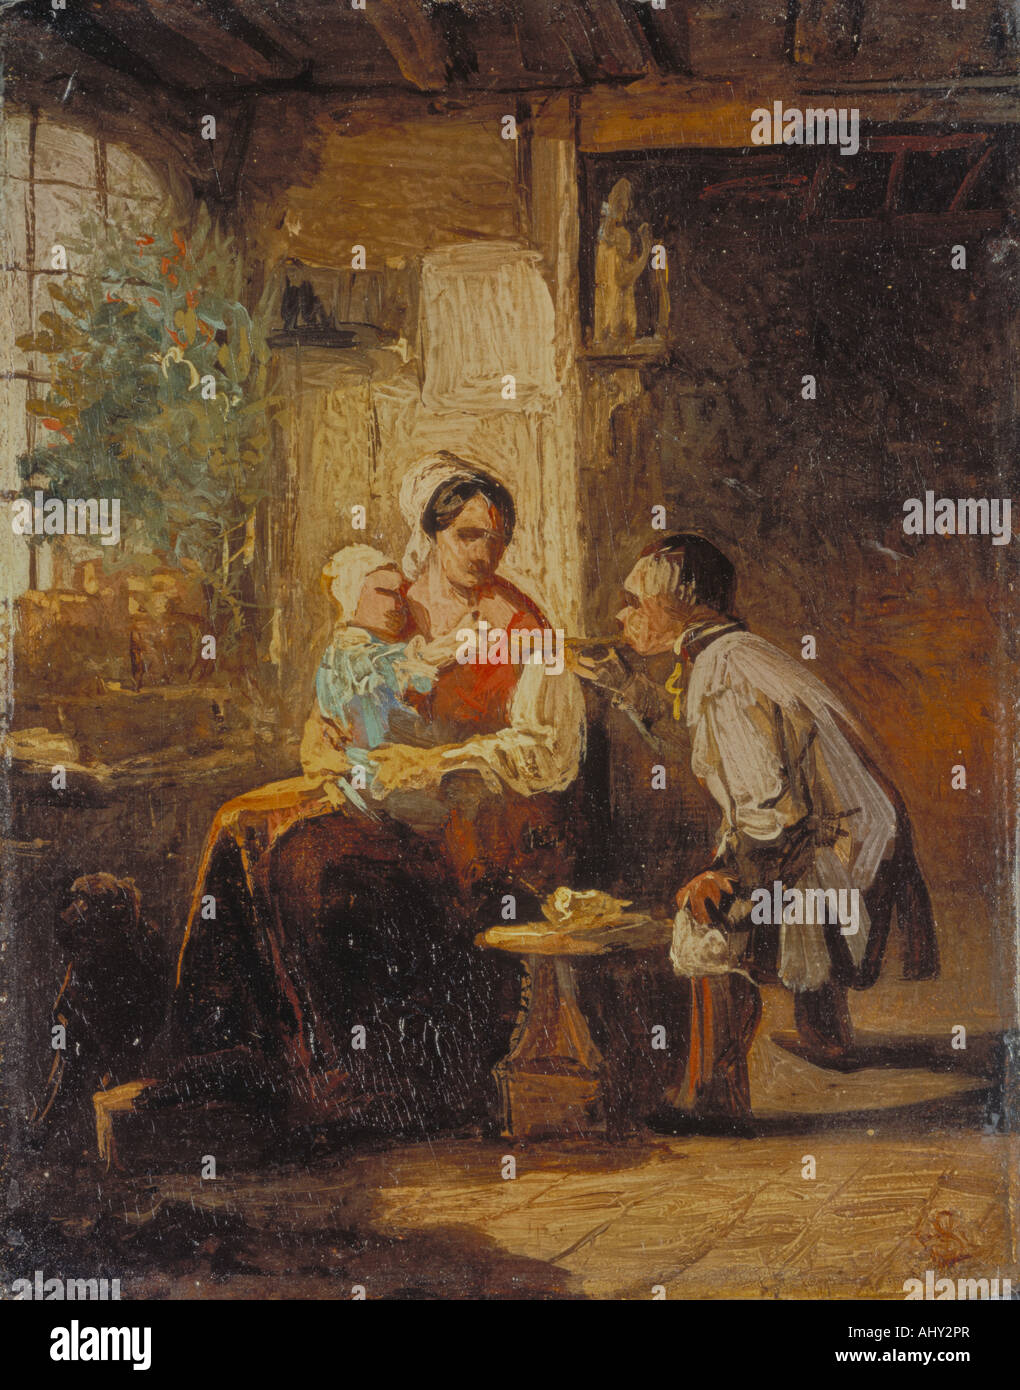 'fine arts, Moralt, Ludwig (1815 - 1888): painting, 'Eltern und Kind', German, parents and child, family, mother, room, father Stock Photo